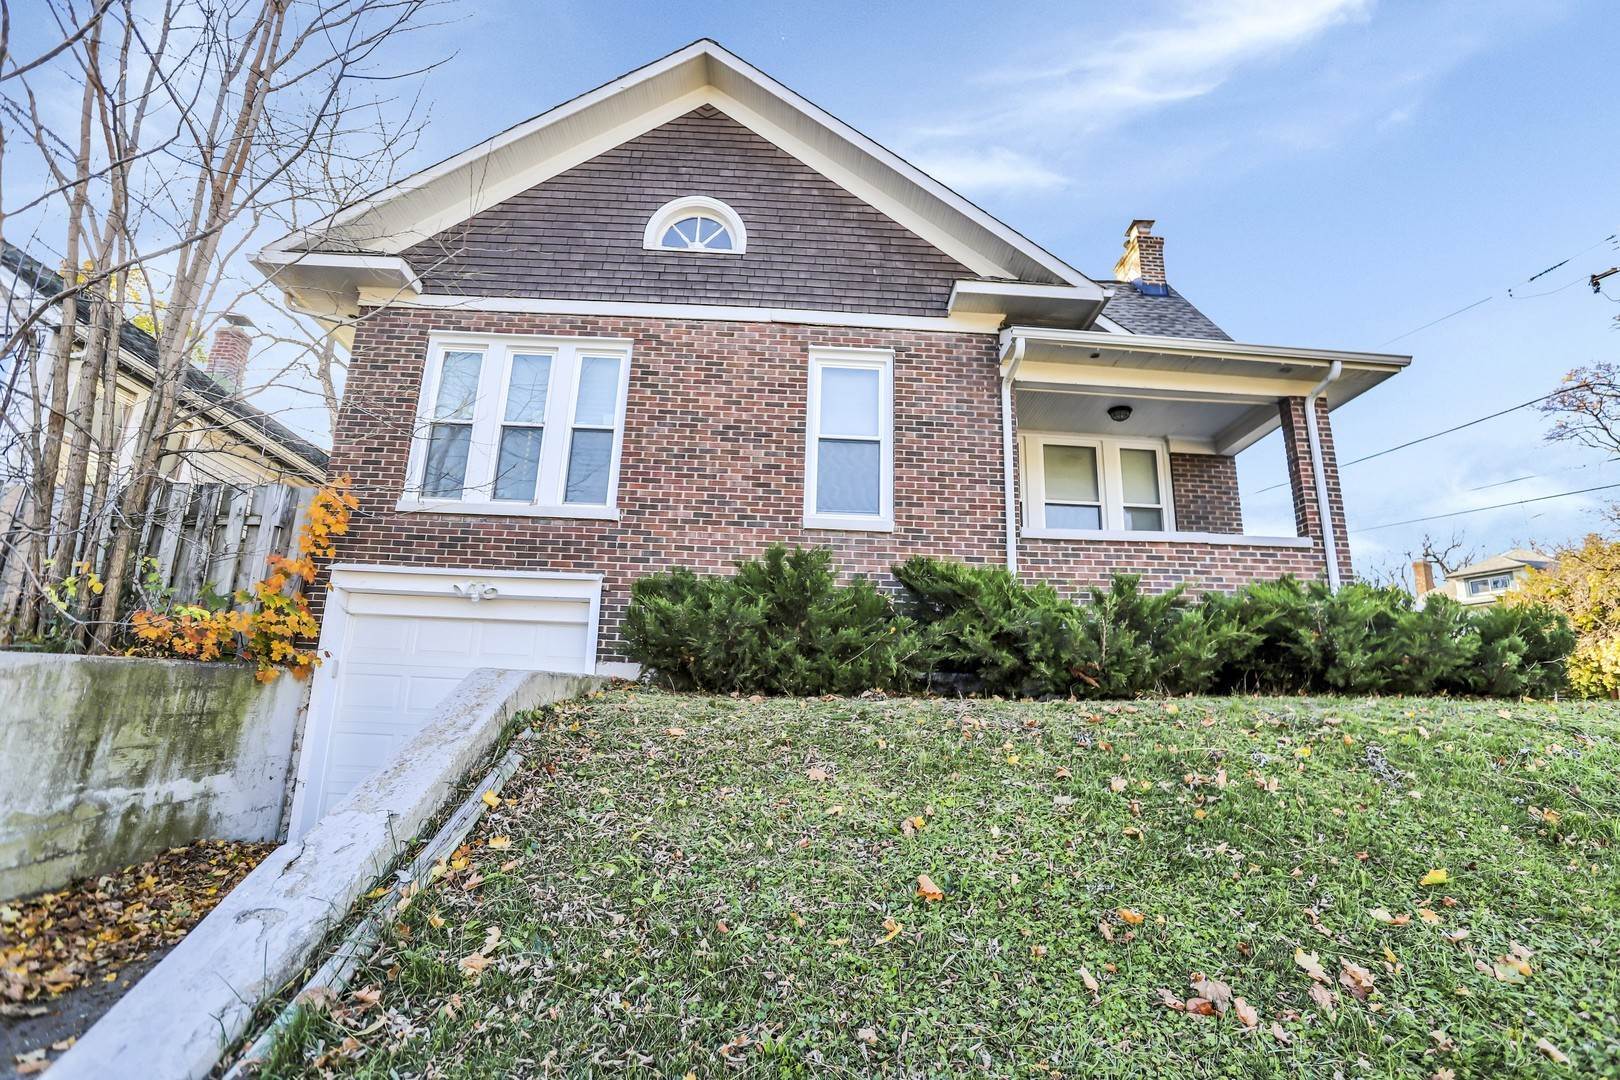 29. Single Family for Sale at Elgin, IL 60123